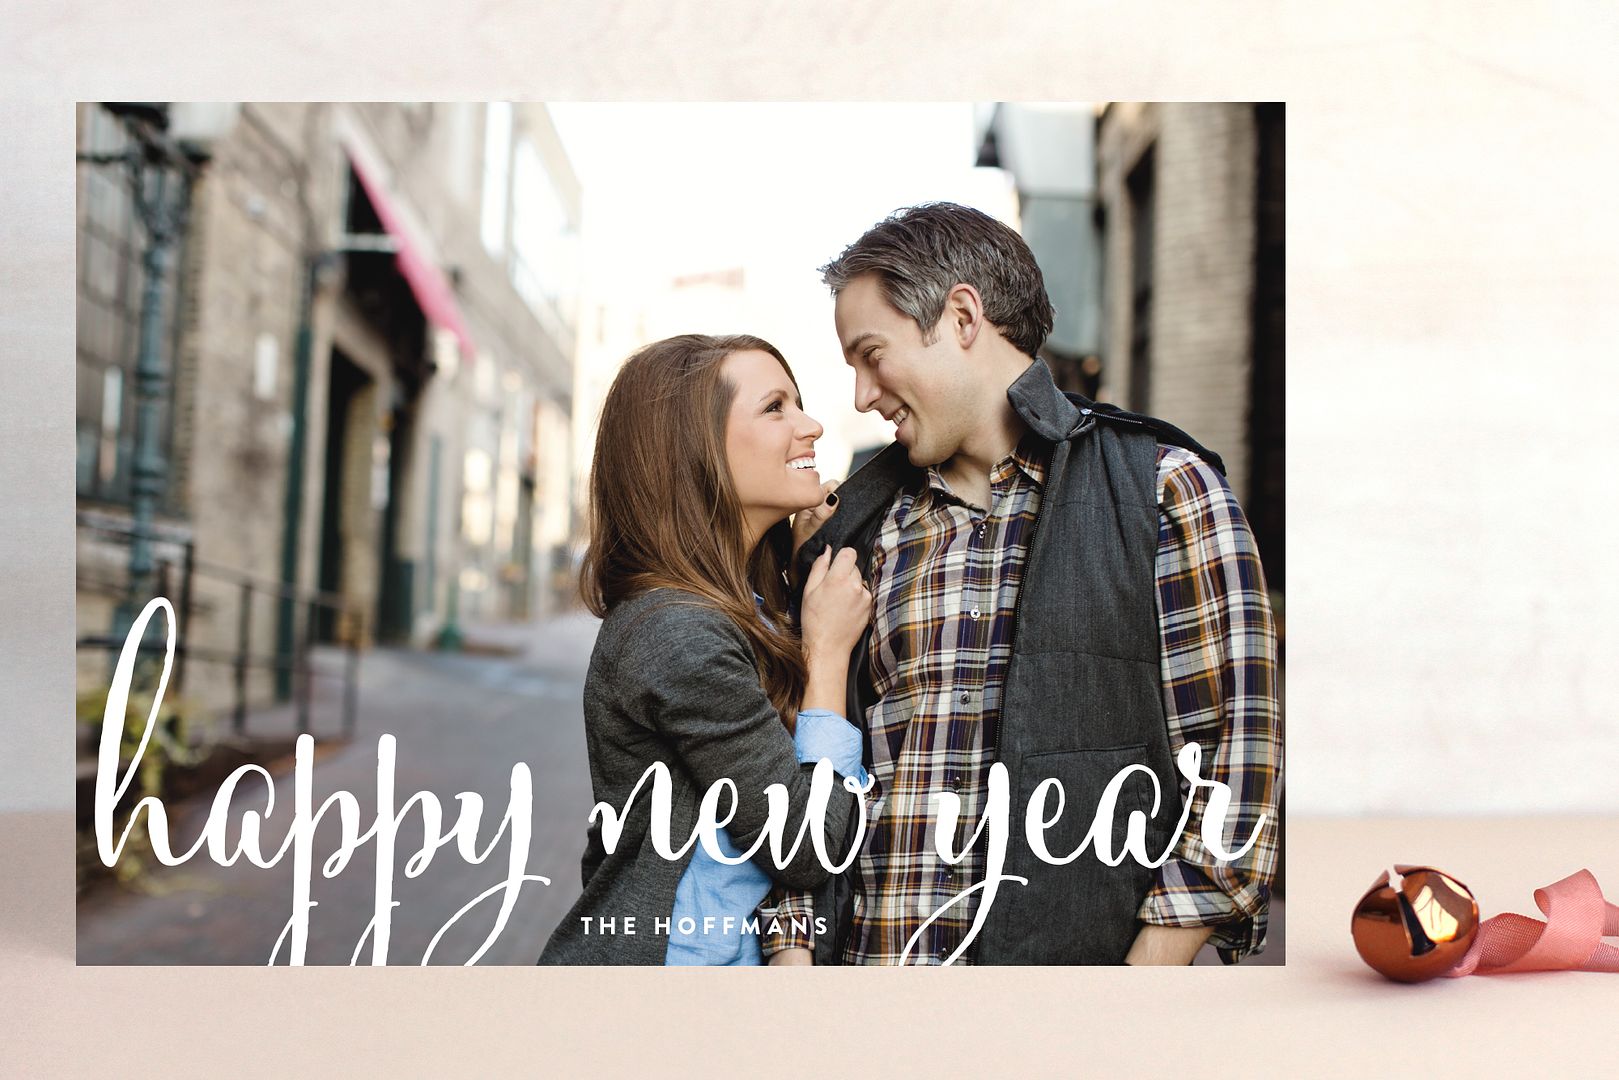 New Year Cards from Minted - www.theperfectpalette.com - 15% off with code: HOLIDAY15